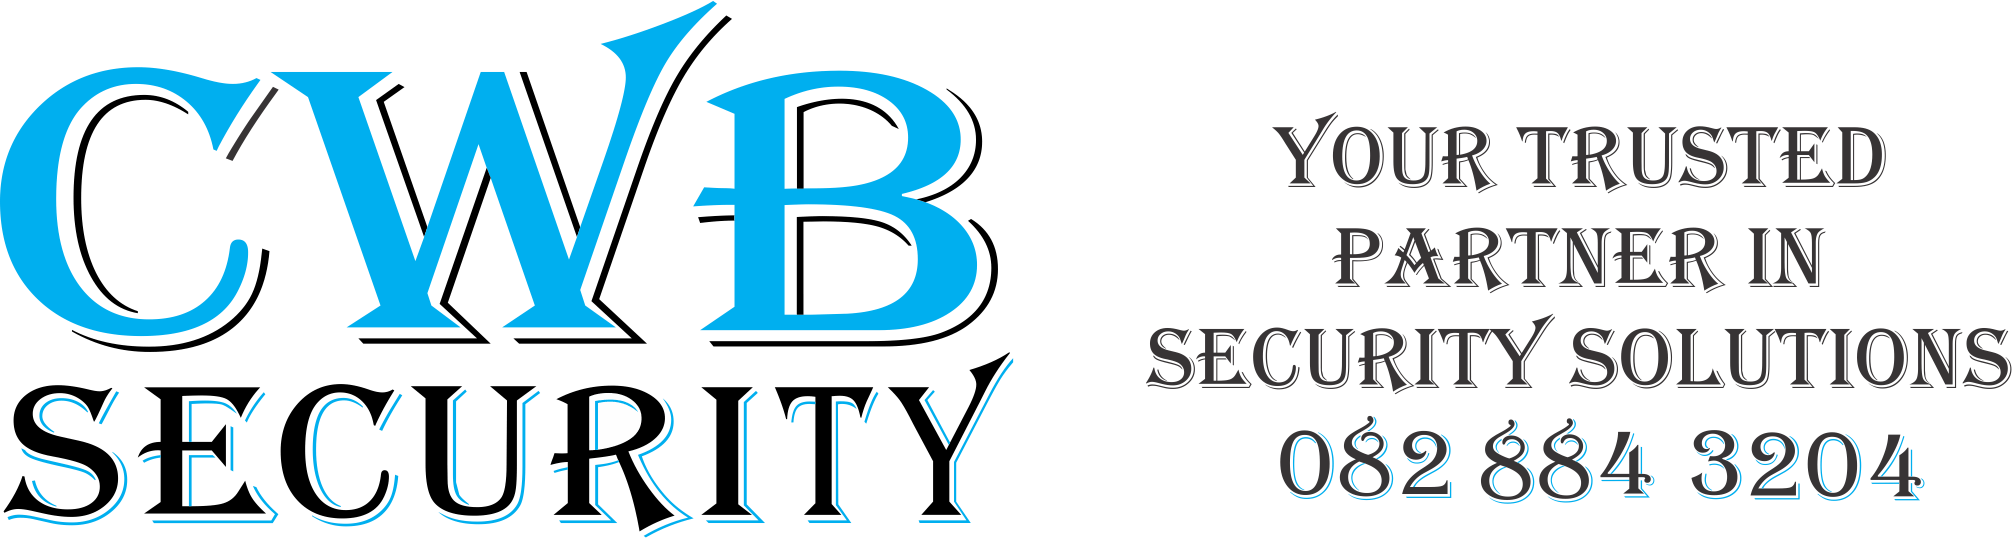 CWB Logo - CWB Security – Your trusted partner in security